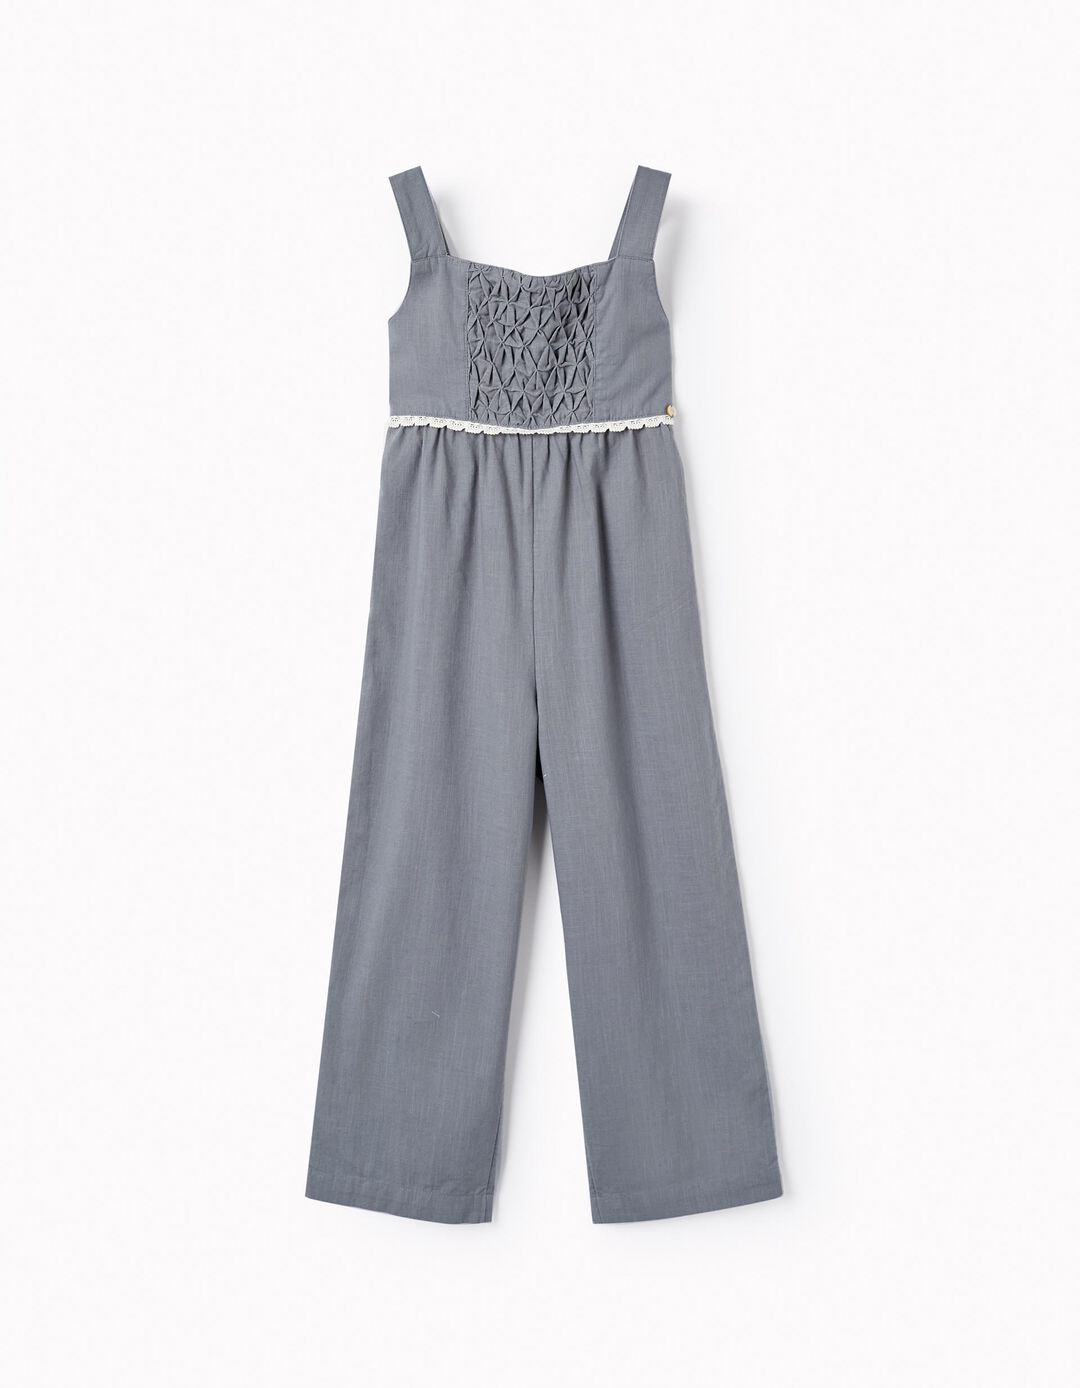 Cotton Jumpsuit with Lace for Girls, Grey